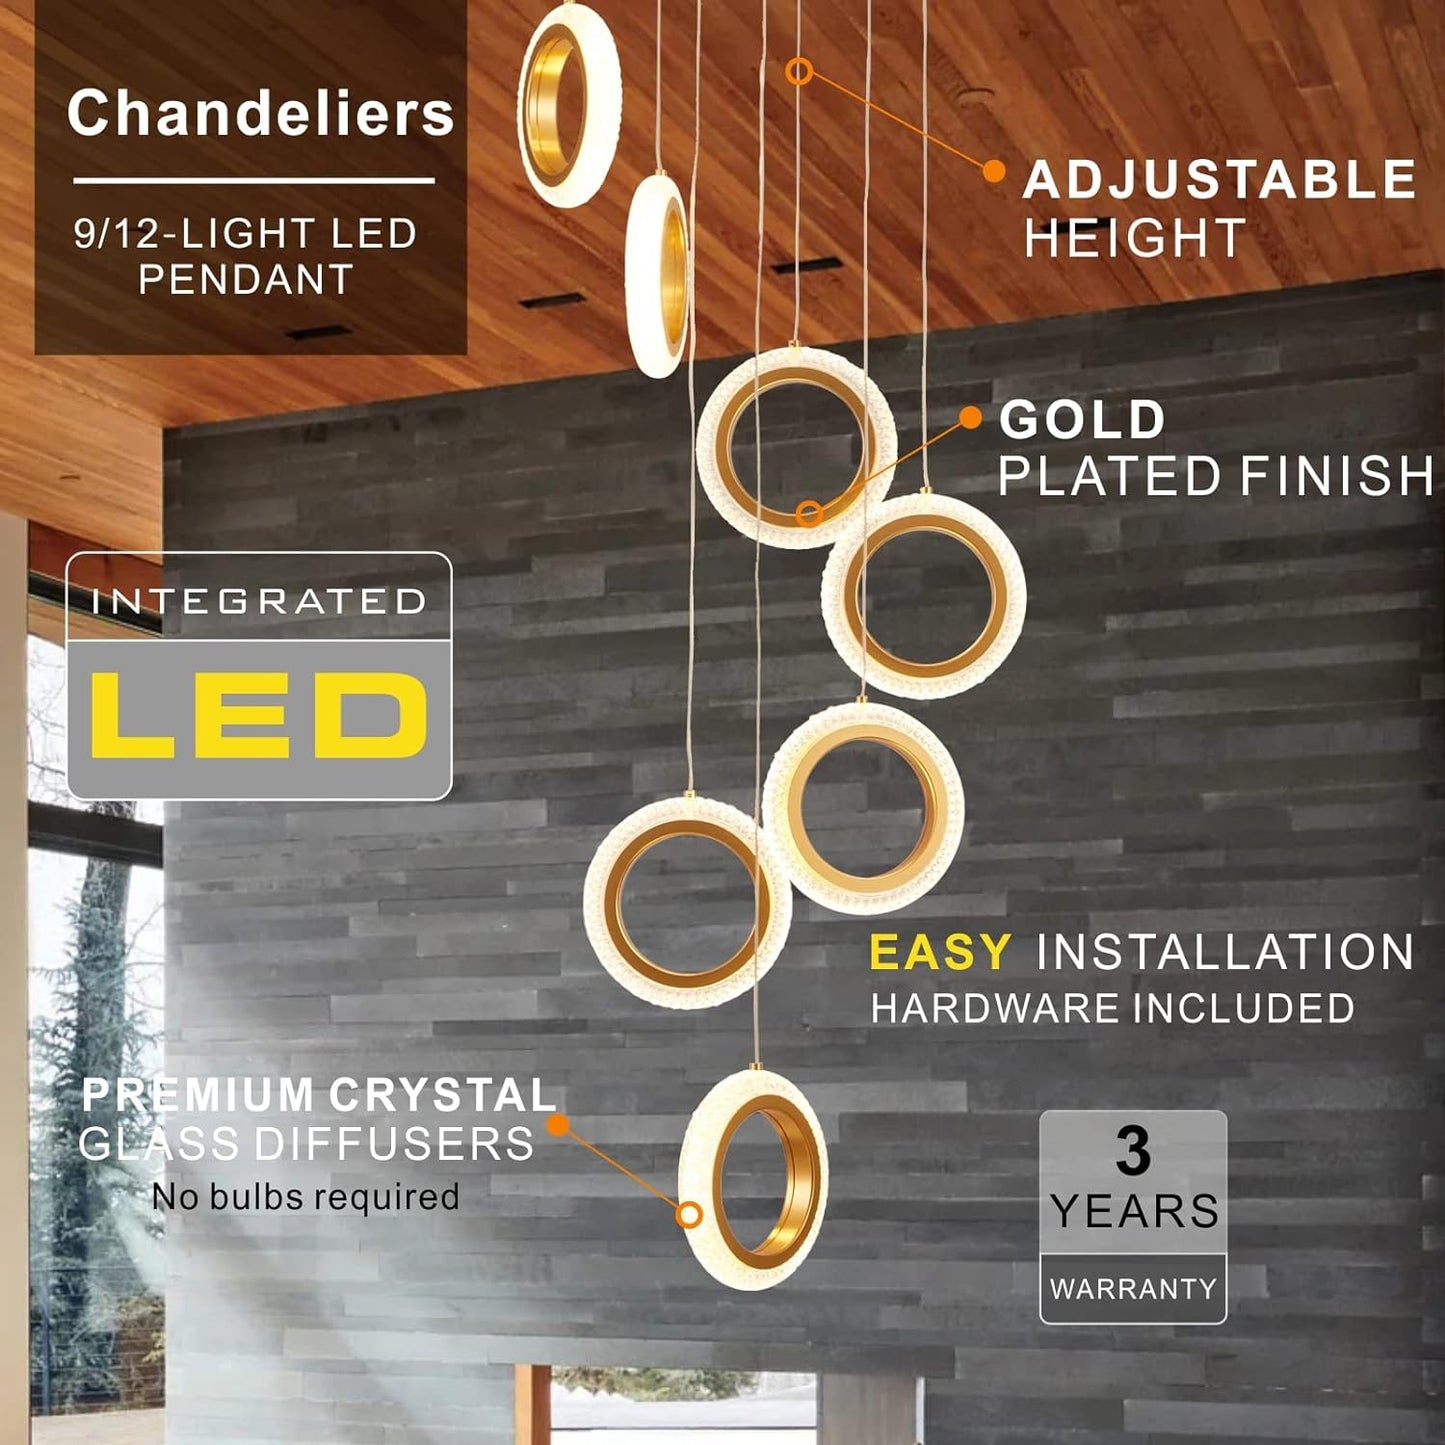 12 Rings Staircase Chandelier,Gold Modern Crystal Led Chandelier,Dimmable High Ceiling Chandelier with Remote ,Modern Led Pendant Light Led Chandelier Light ,Large High Ceilings Hanging Light Fixt